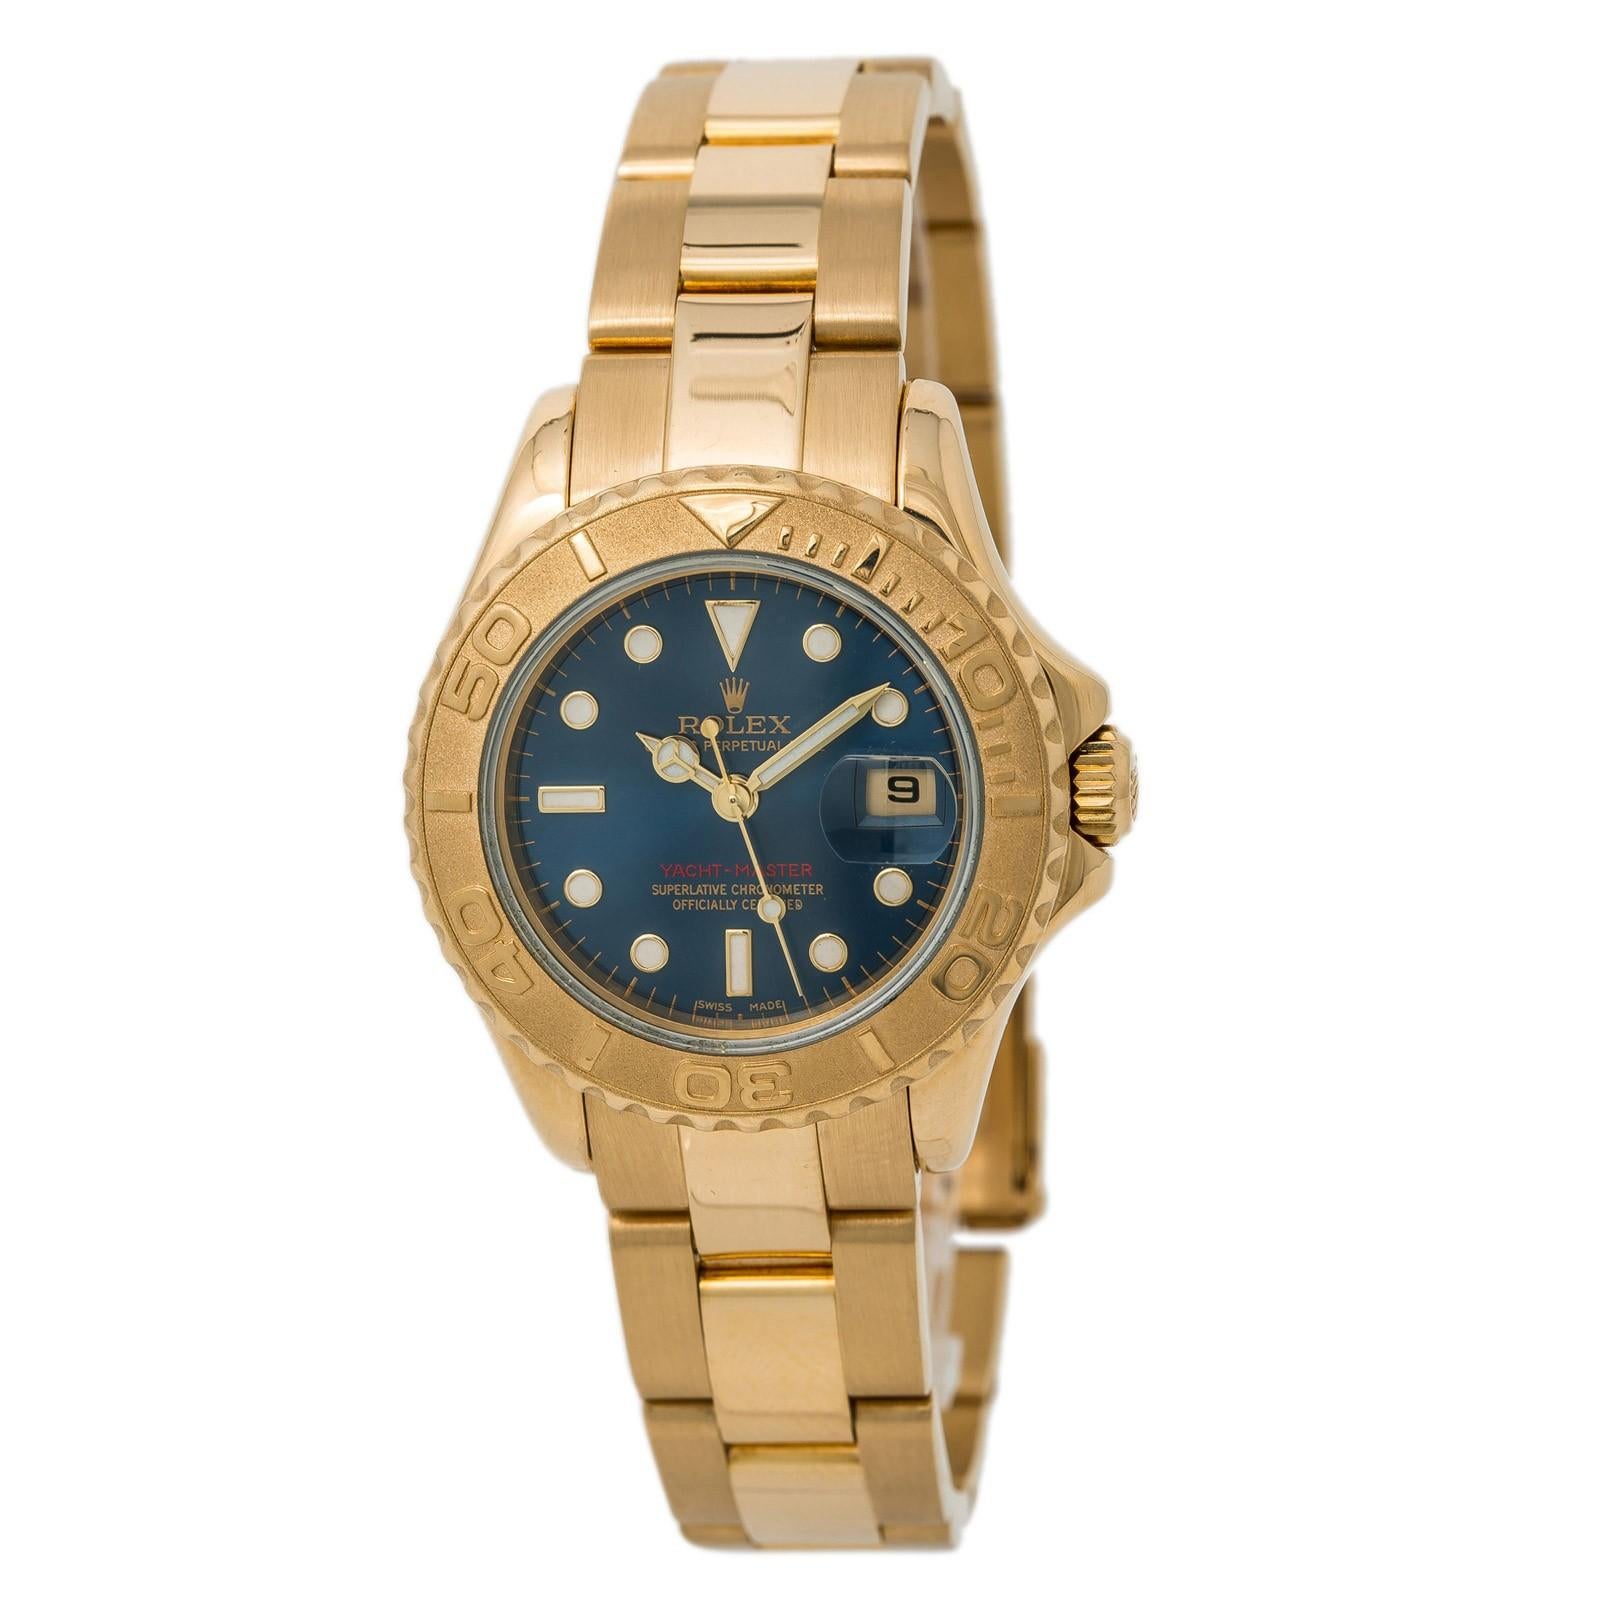 Certified Rolex Yachtmaster 169628 Women’s Automatic Watch Blue Dial 18 Karat YG For Sale